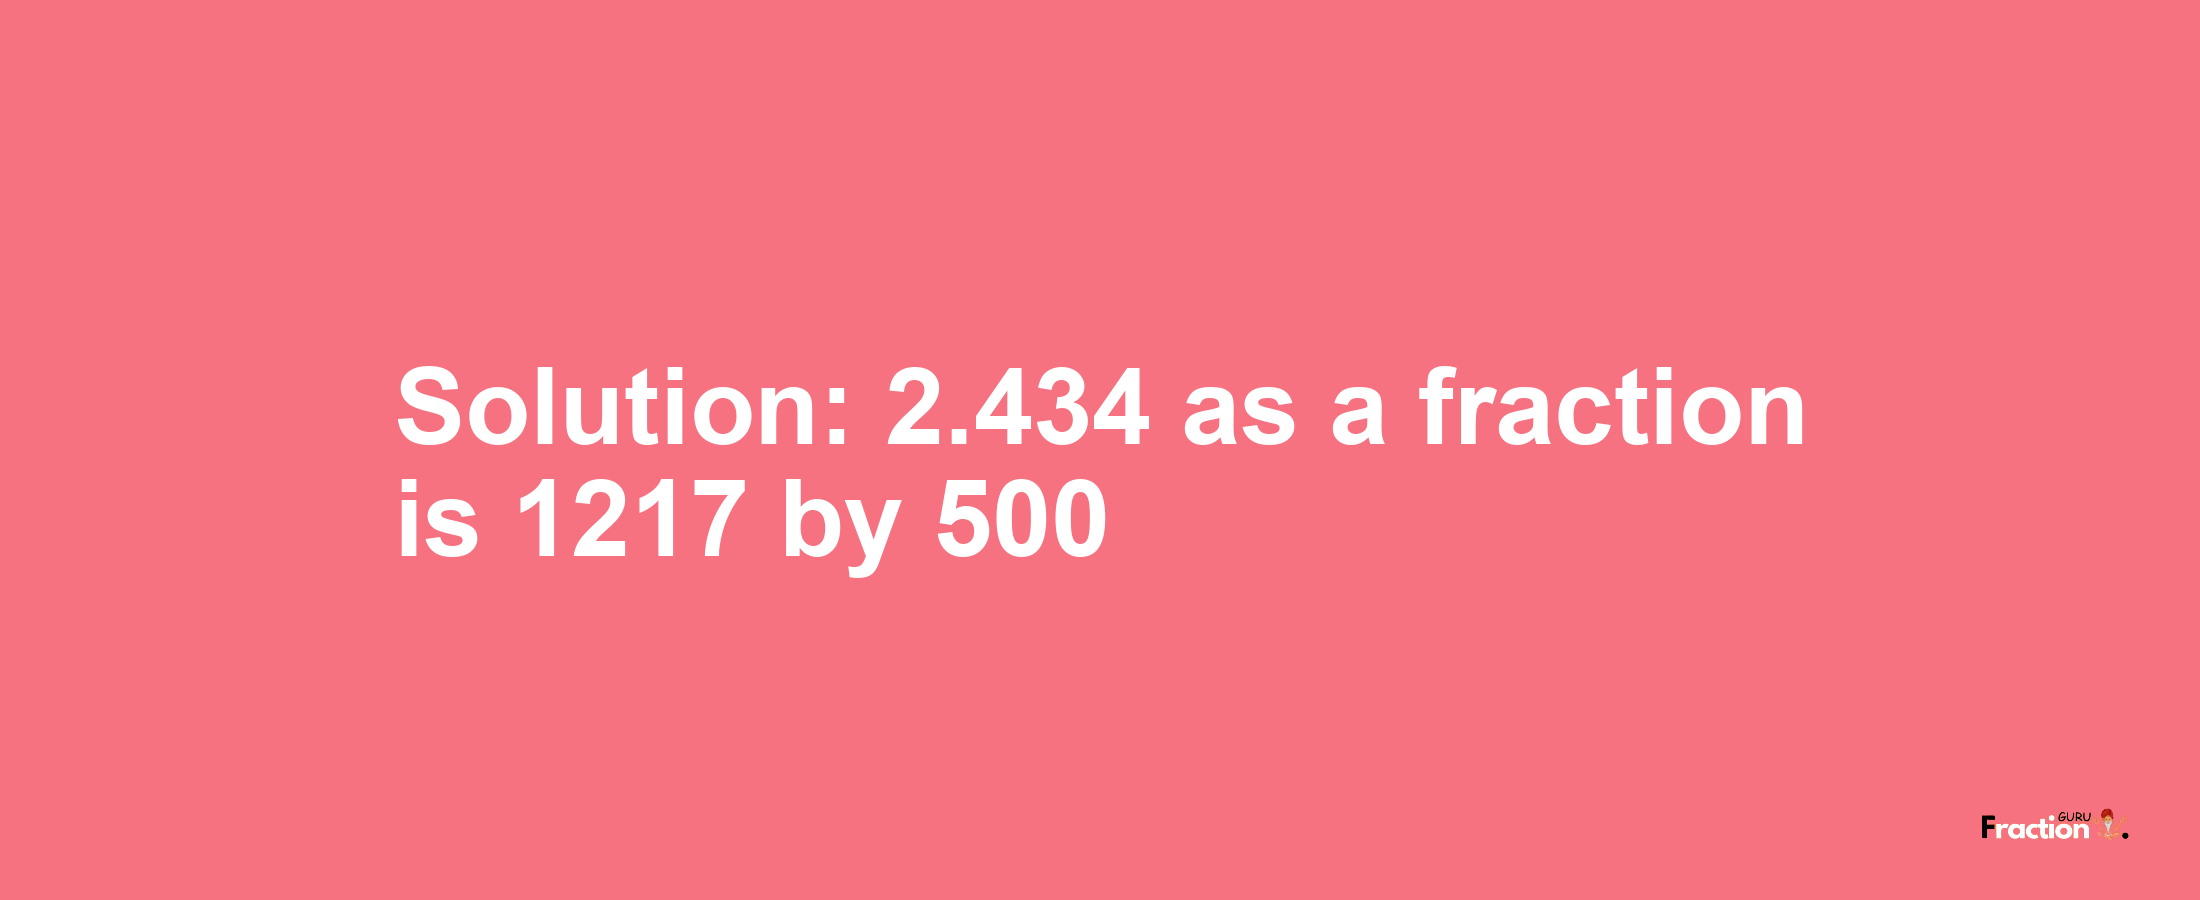 Solution:2.434 as a fraction is 1217/500